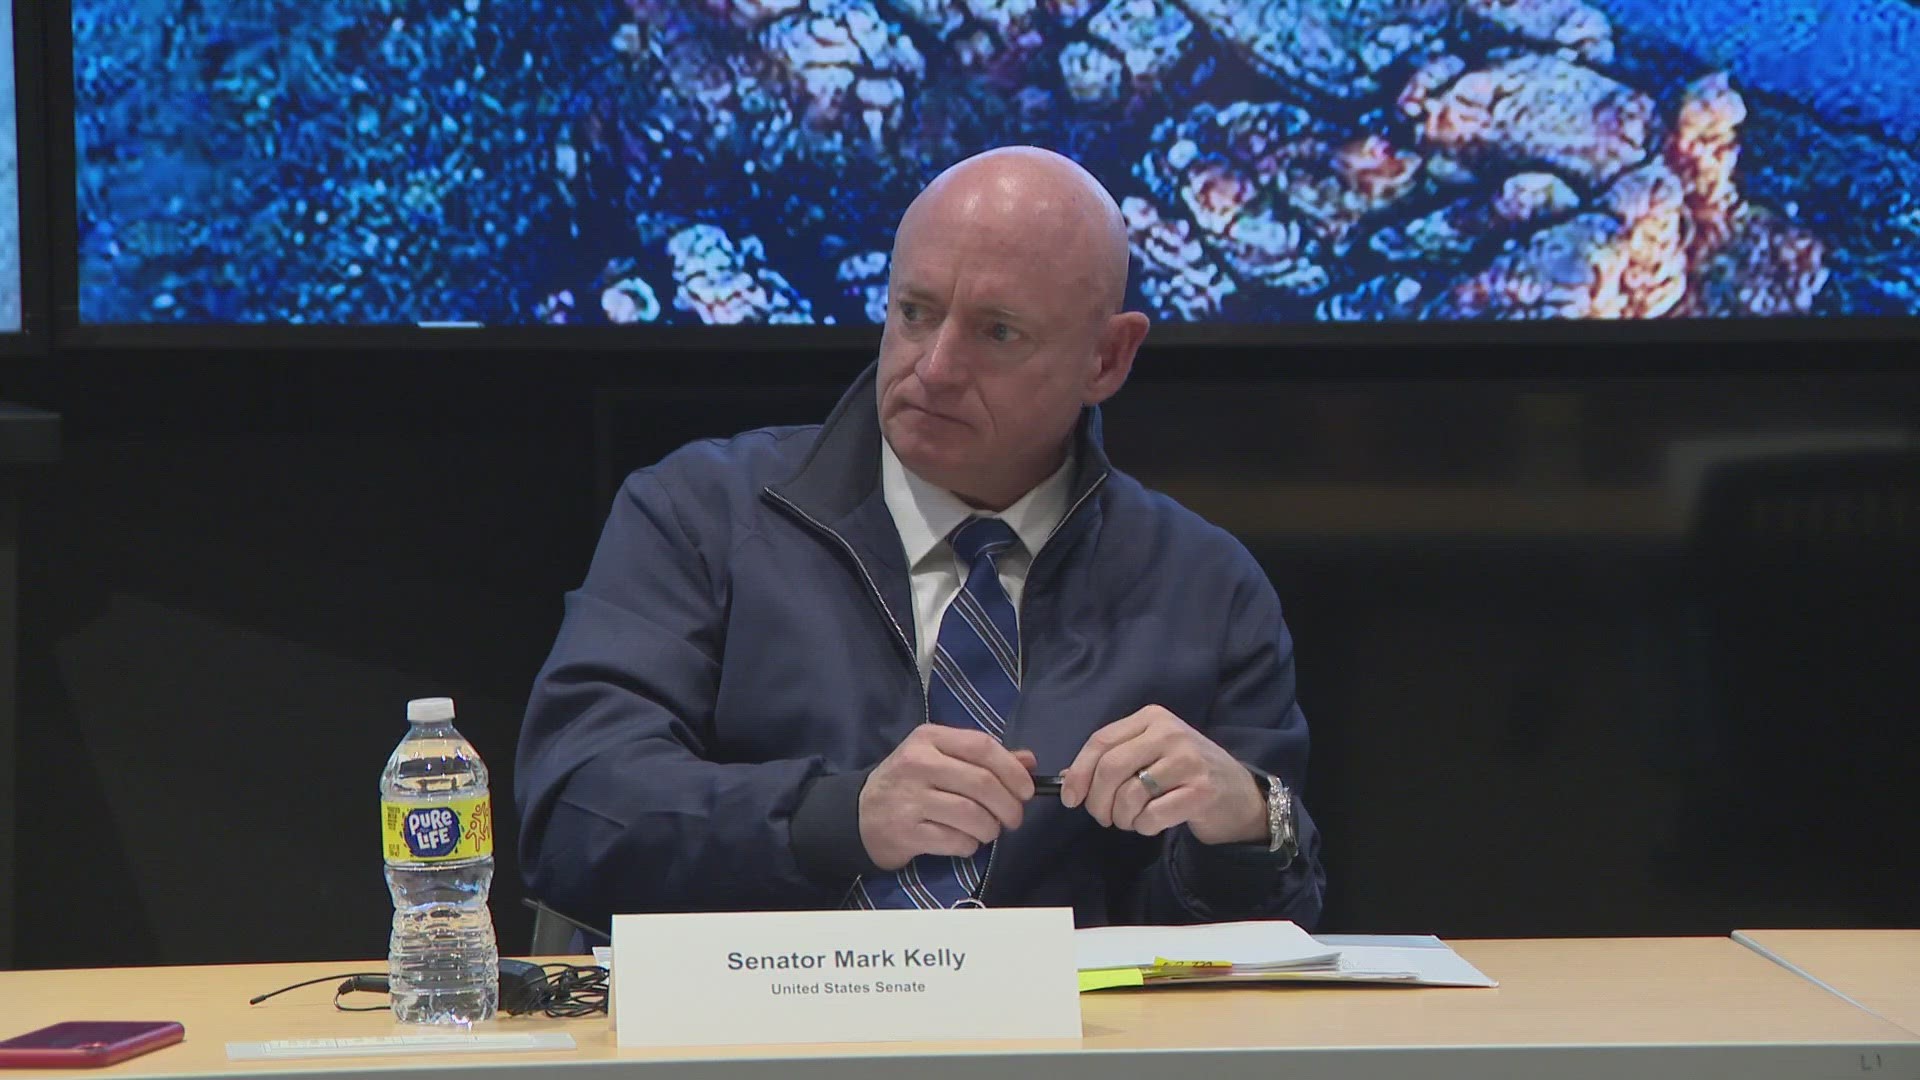 Sen. Mark Kelly was instrumental in allocating $250 million to help with conservation of the lower Colorado River basin.